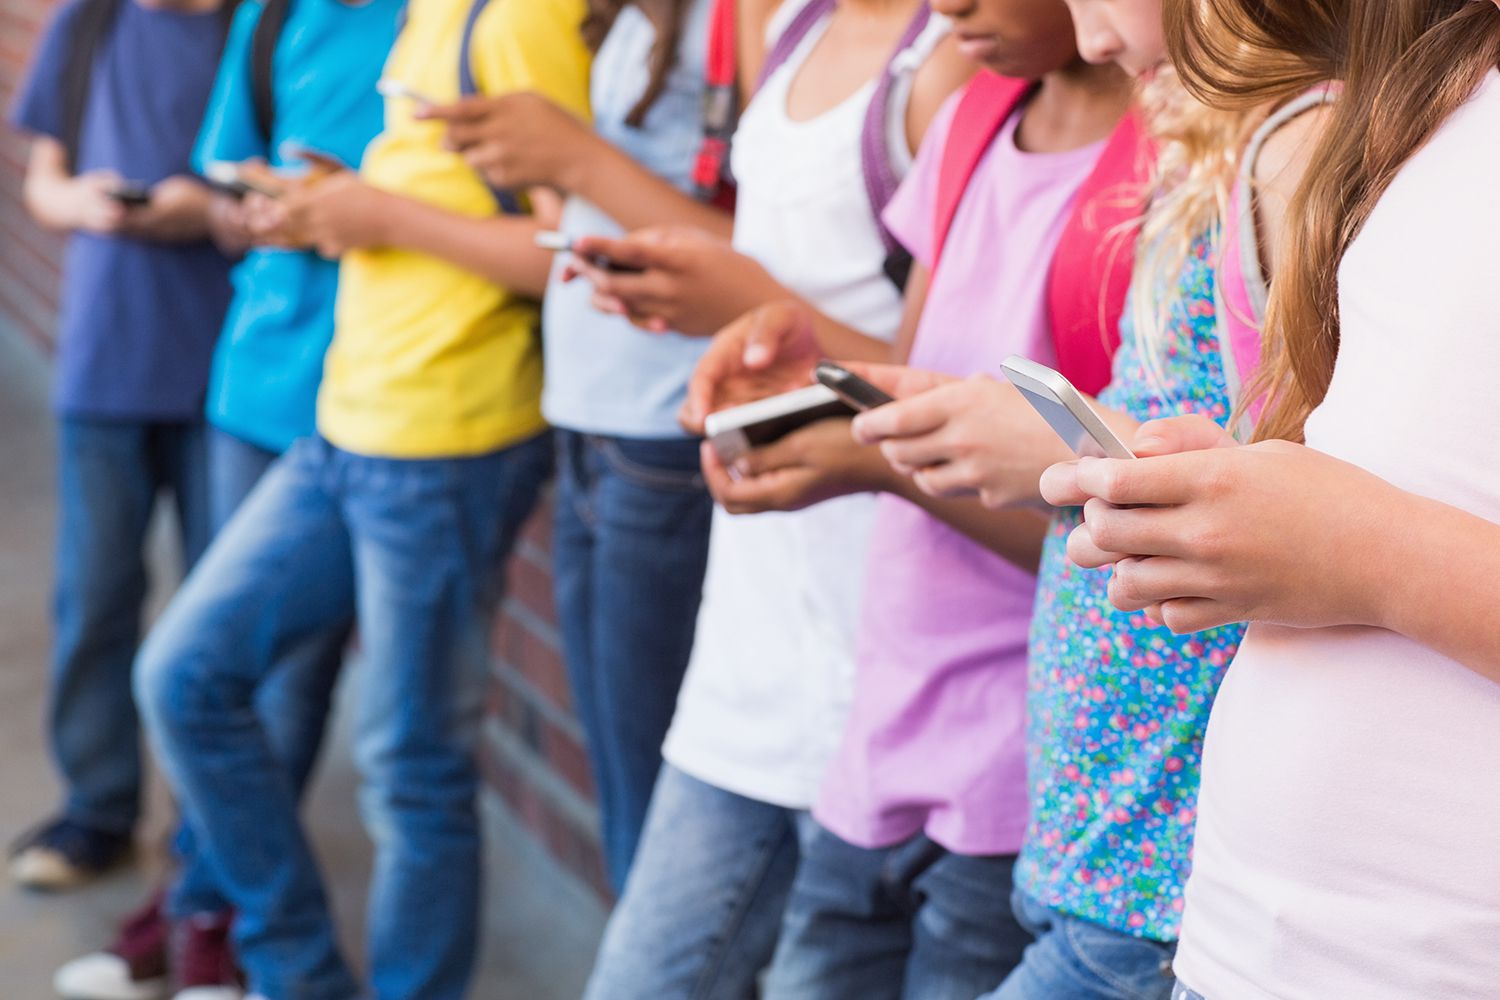 iGen: Are Smartphones Ruining Our Youth? A Deep Dive into Haidt's 'The Anxious Generation'